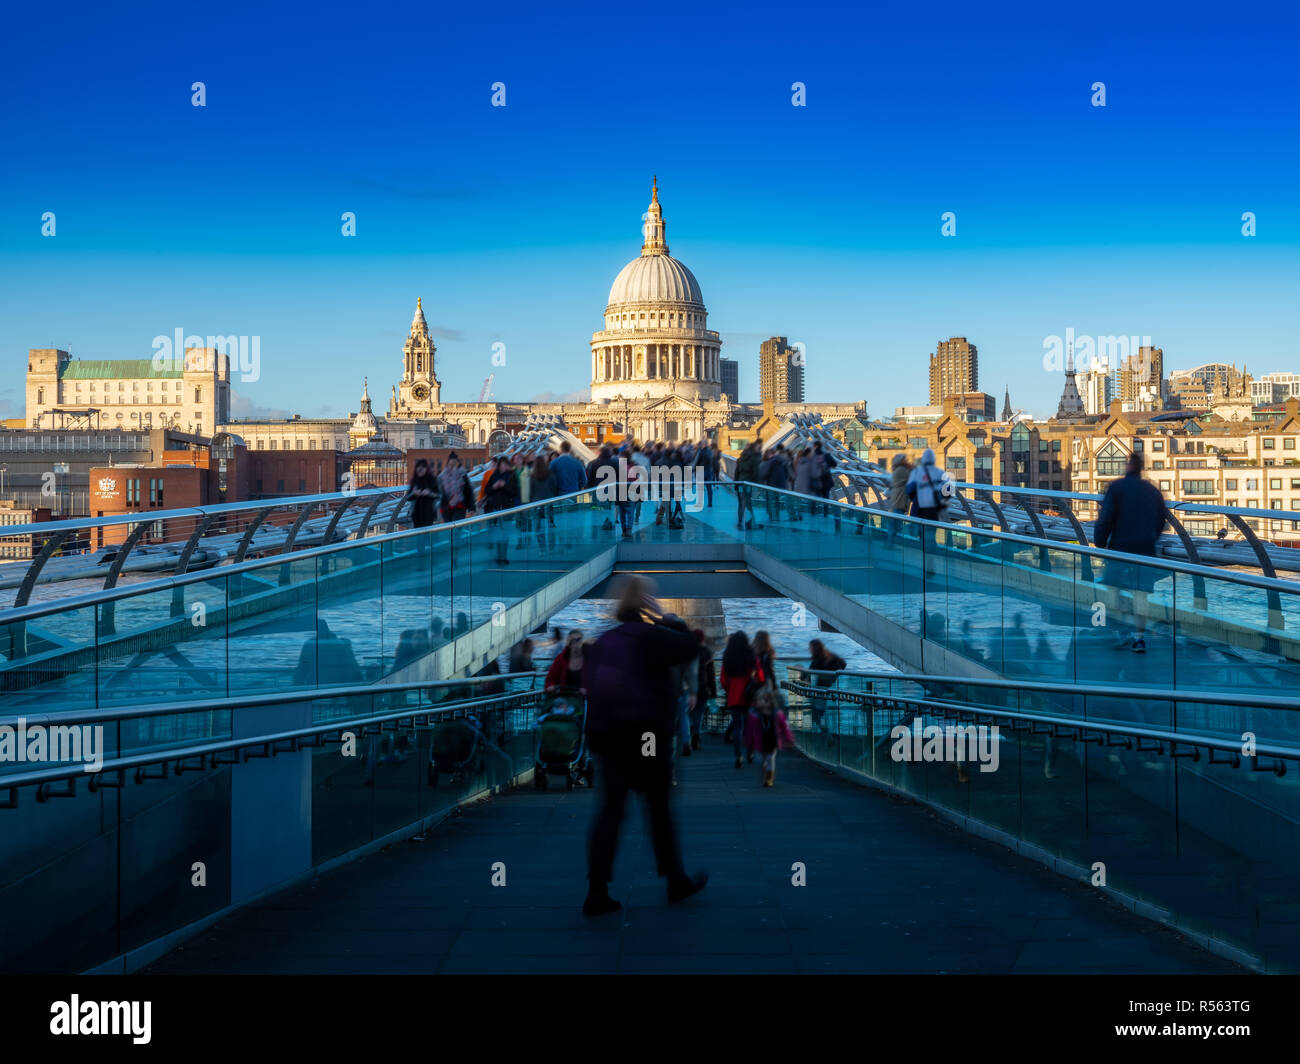 St Paul's Cathedral from the Millennium Bridge with people blurred by motion blur, London, England, UK Stock Photo